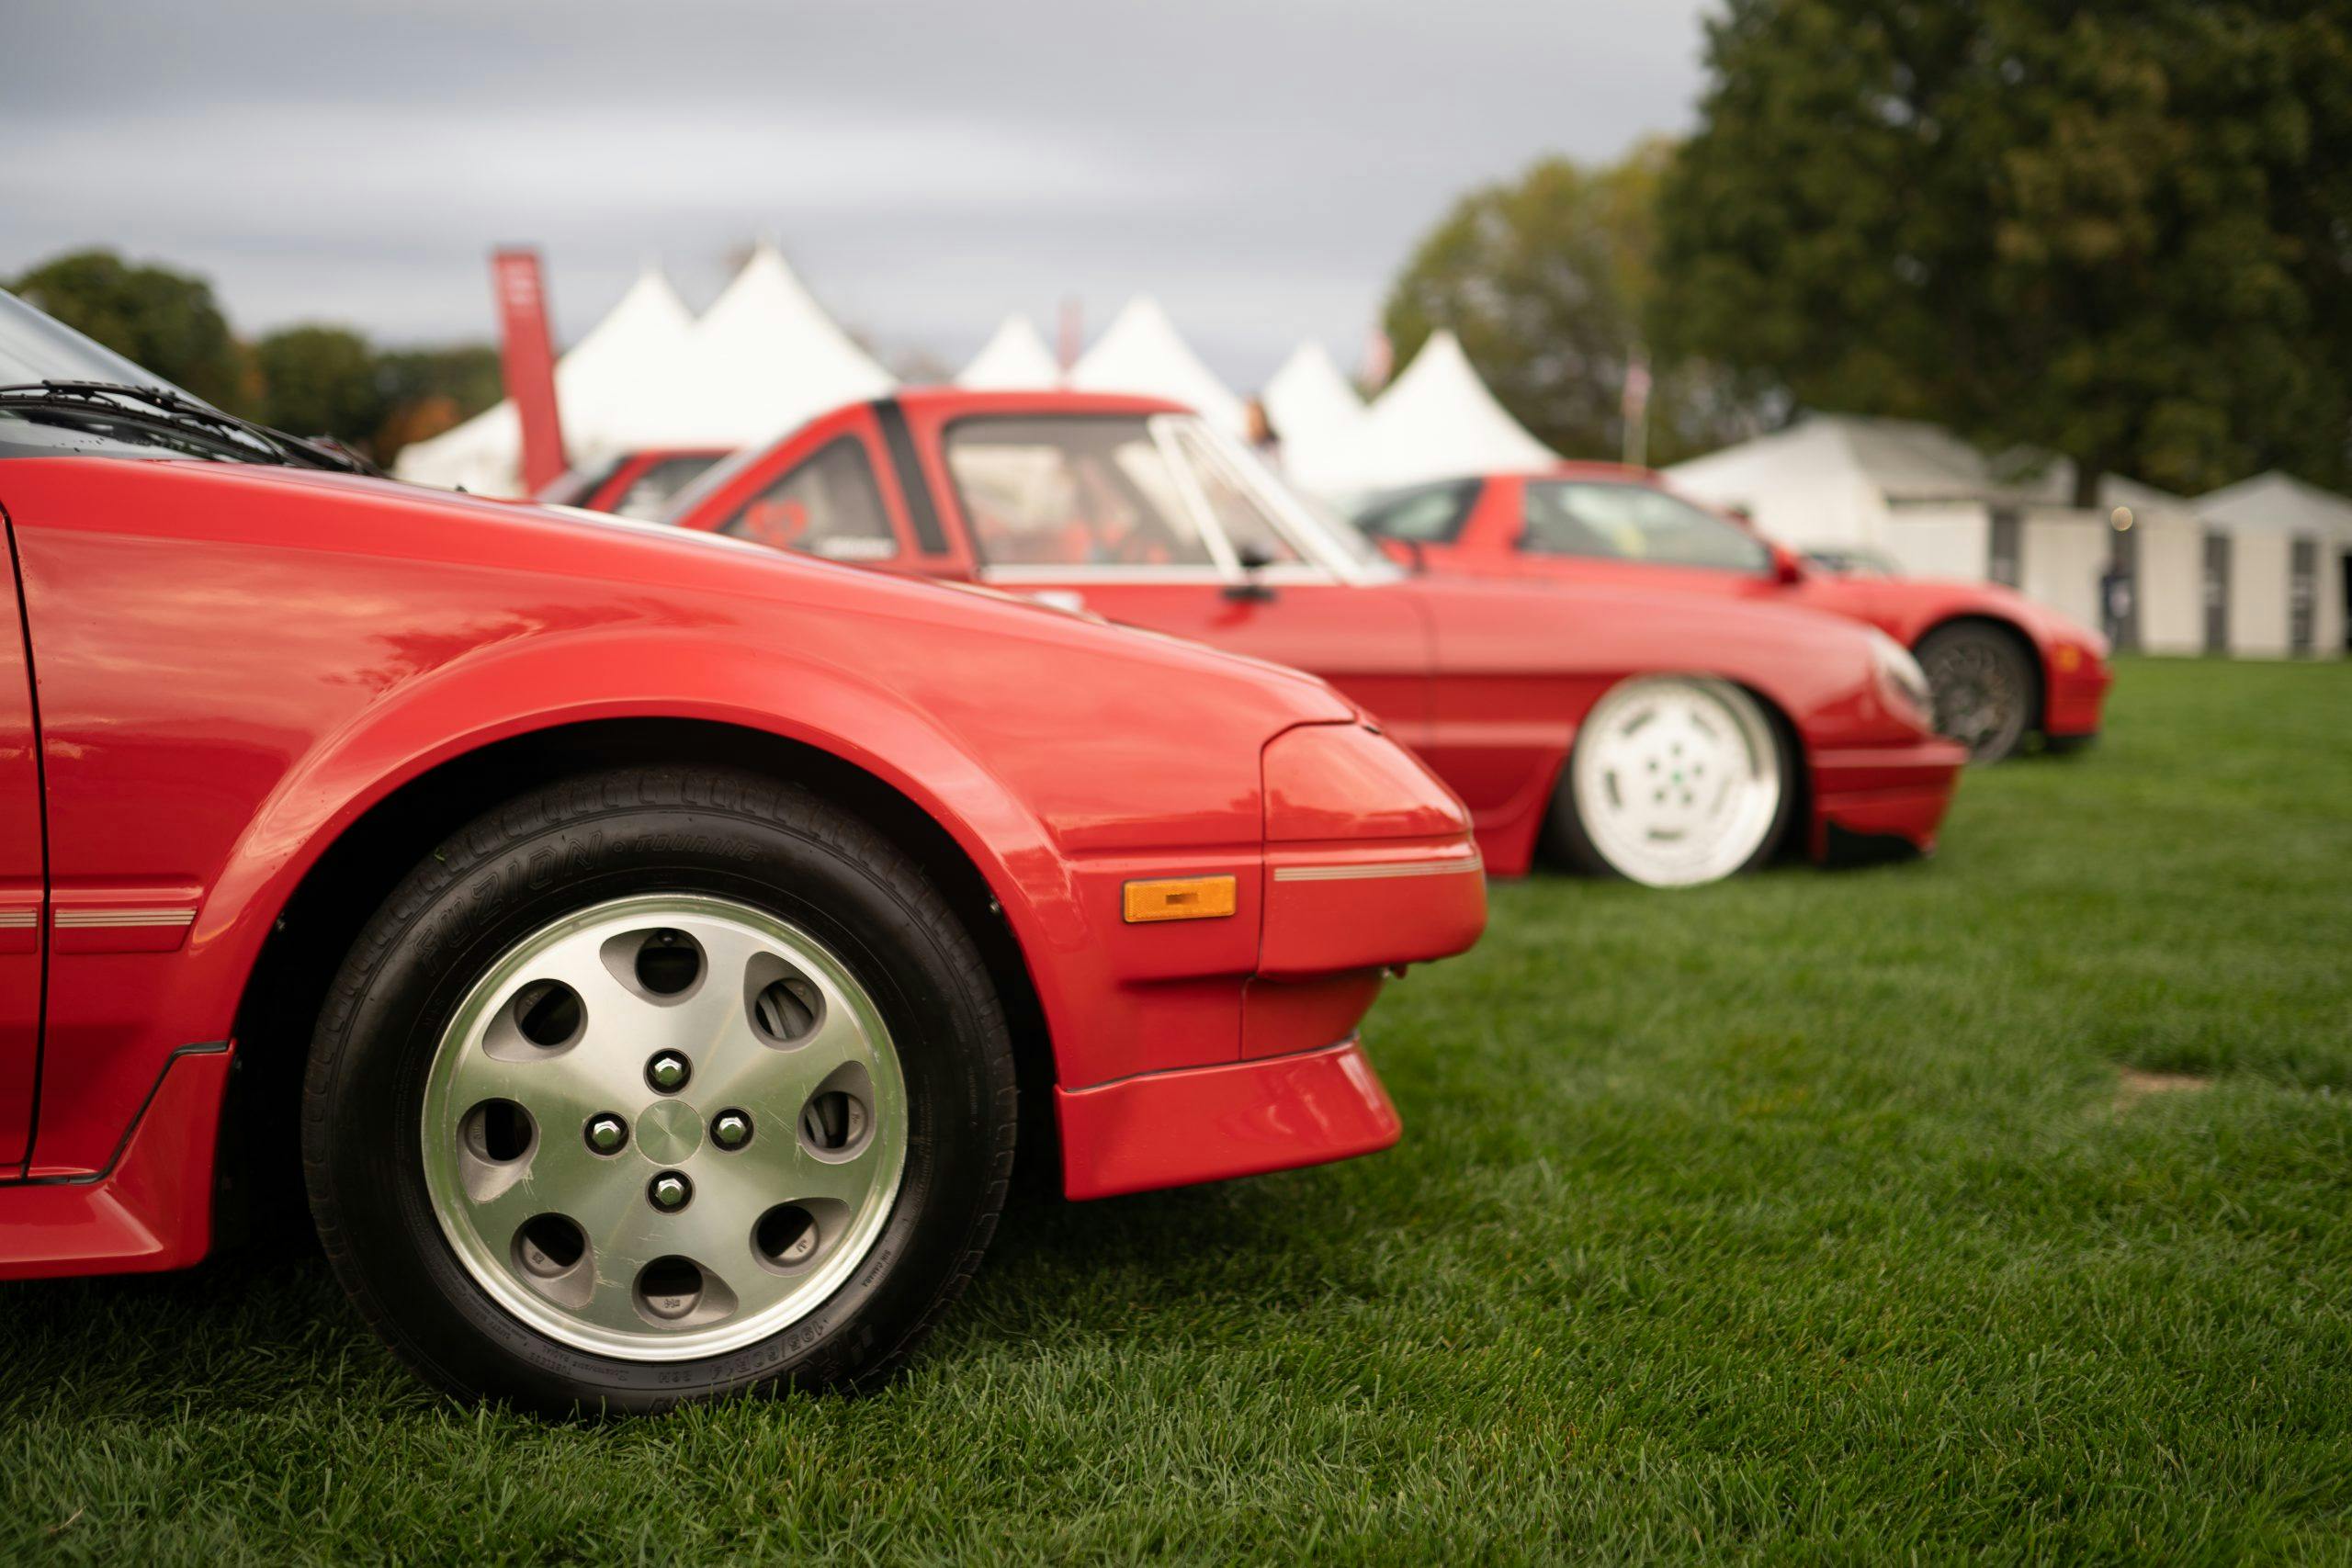 Three red cars line the show field at RADwood event